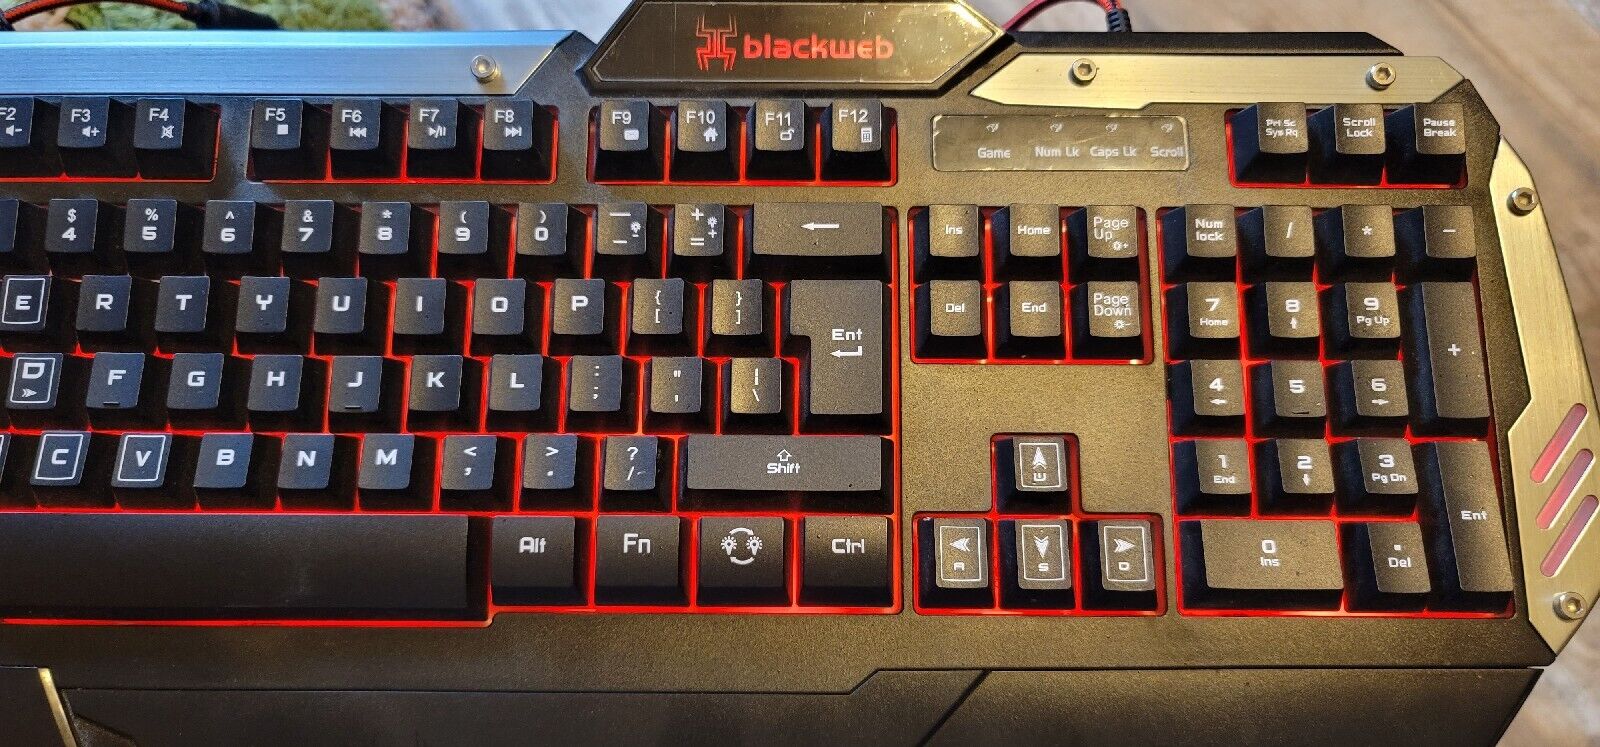 Blackweb Centaur Gaming Keyboard: How To Change The Color Of The Lights